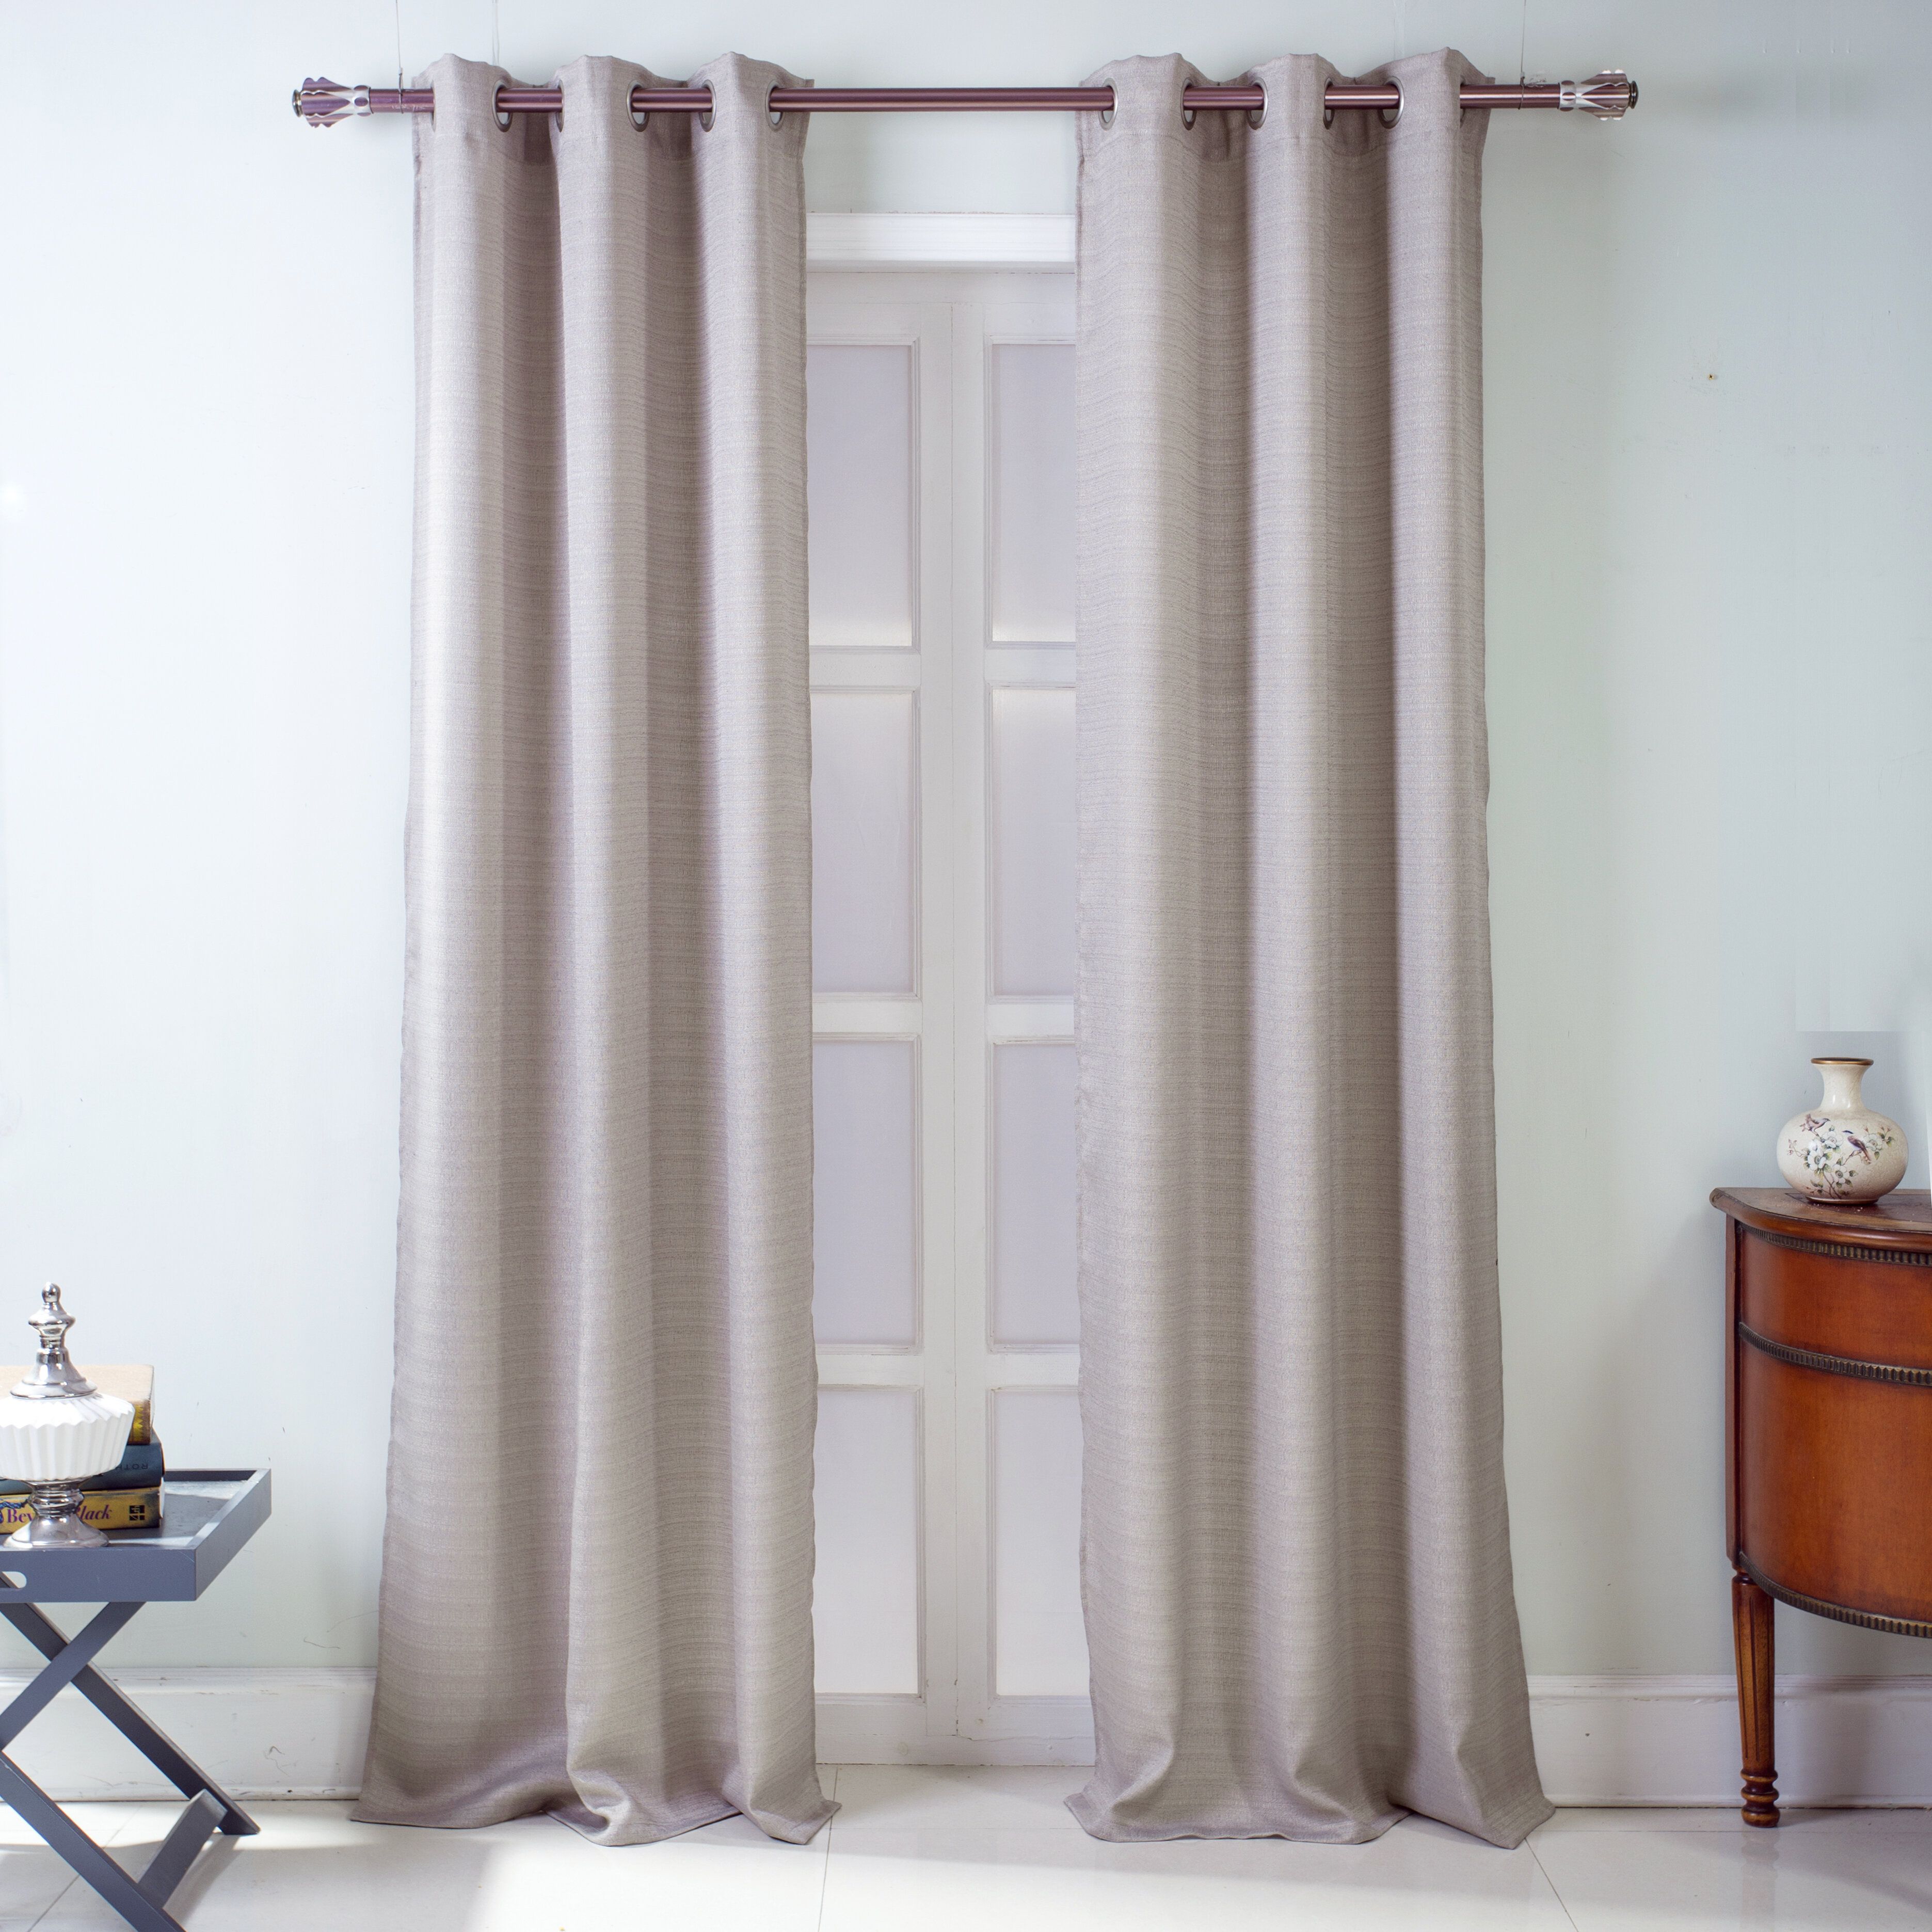 Chadwick Textured Semi Sheer Grommet Curtain Panels Intended For Cooper Textured Thermal Insulated Grommet Curtain Panels (View 20 of 20)